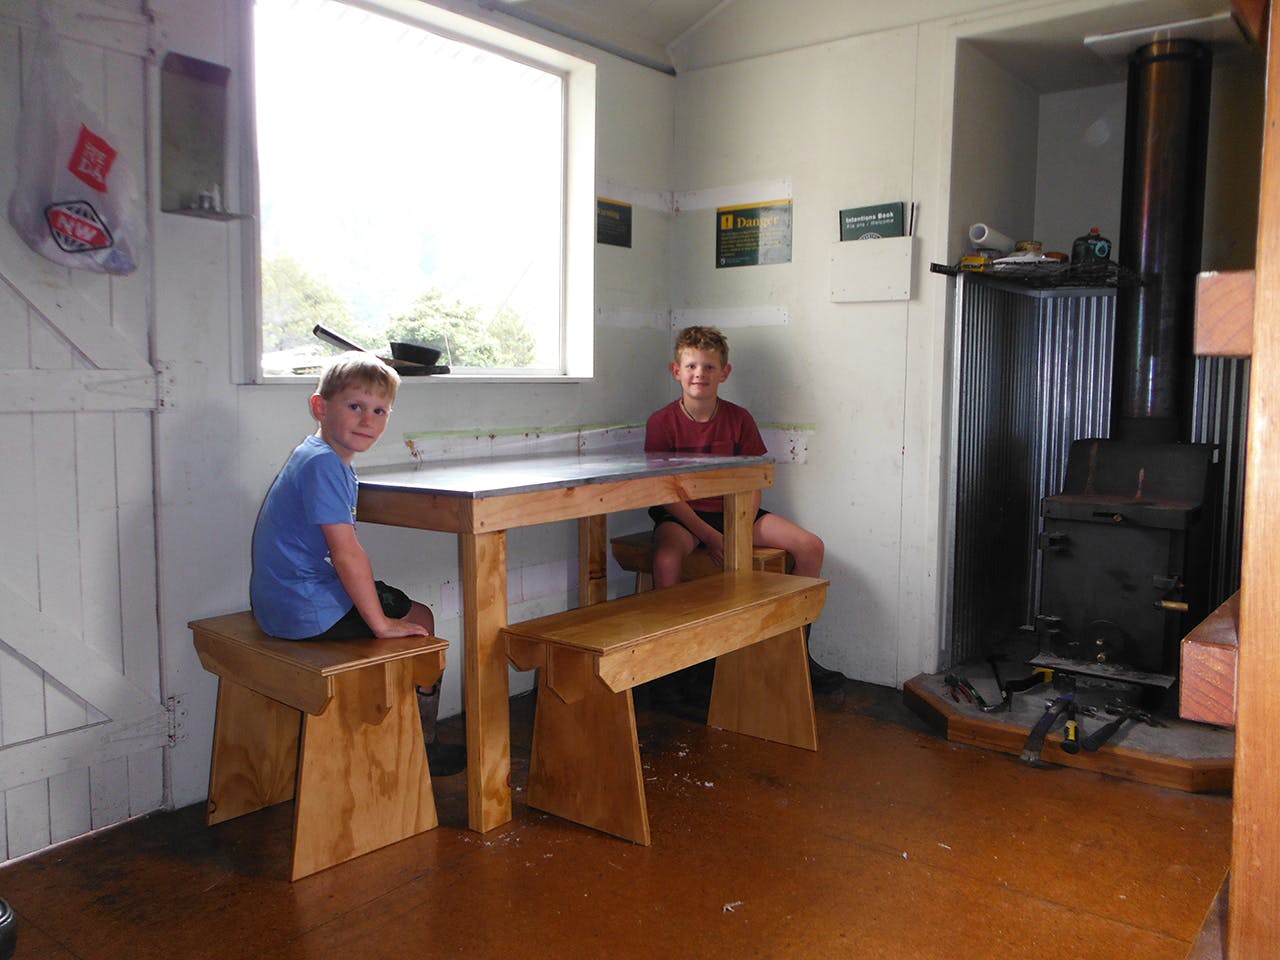 Enjoying the fruits of their labour - a seat at the hut's new bench. Photo: Supplied